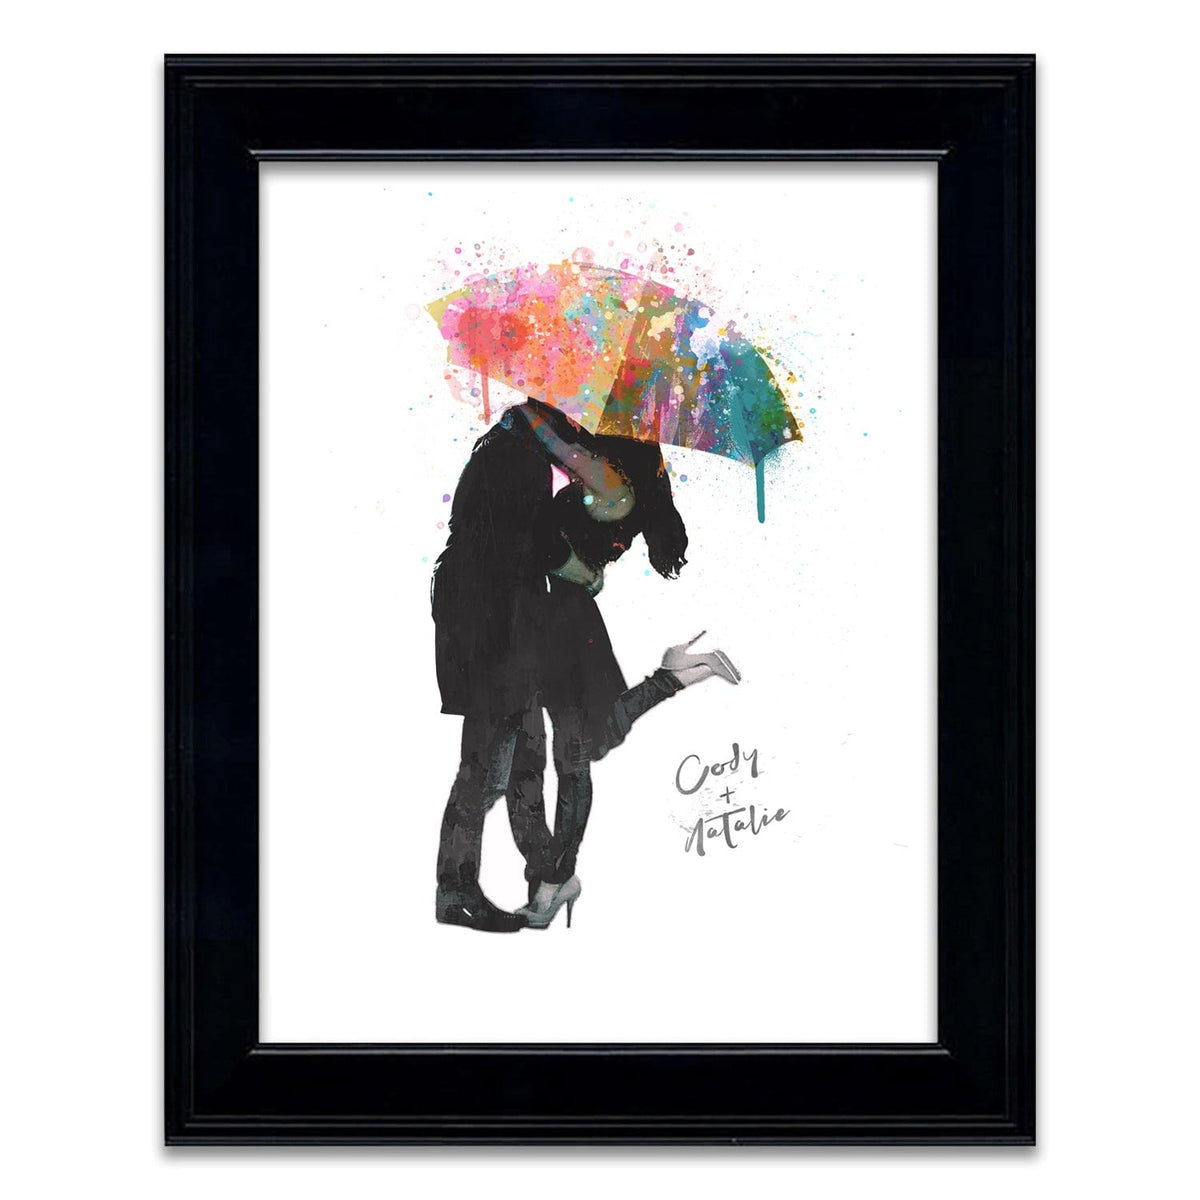 Romantic framed art from Personal Prints gifts